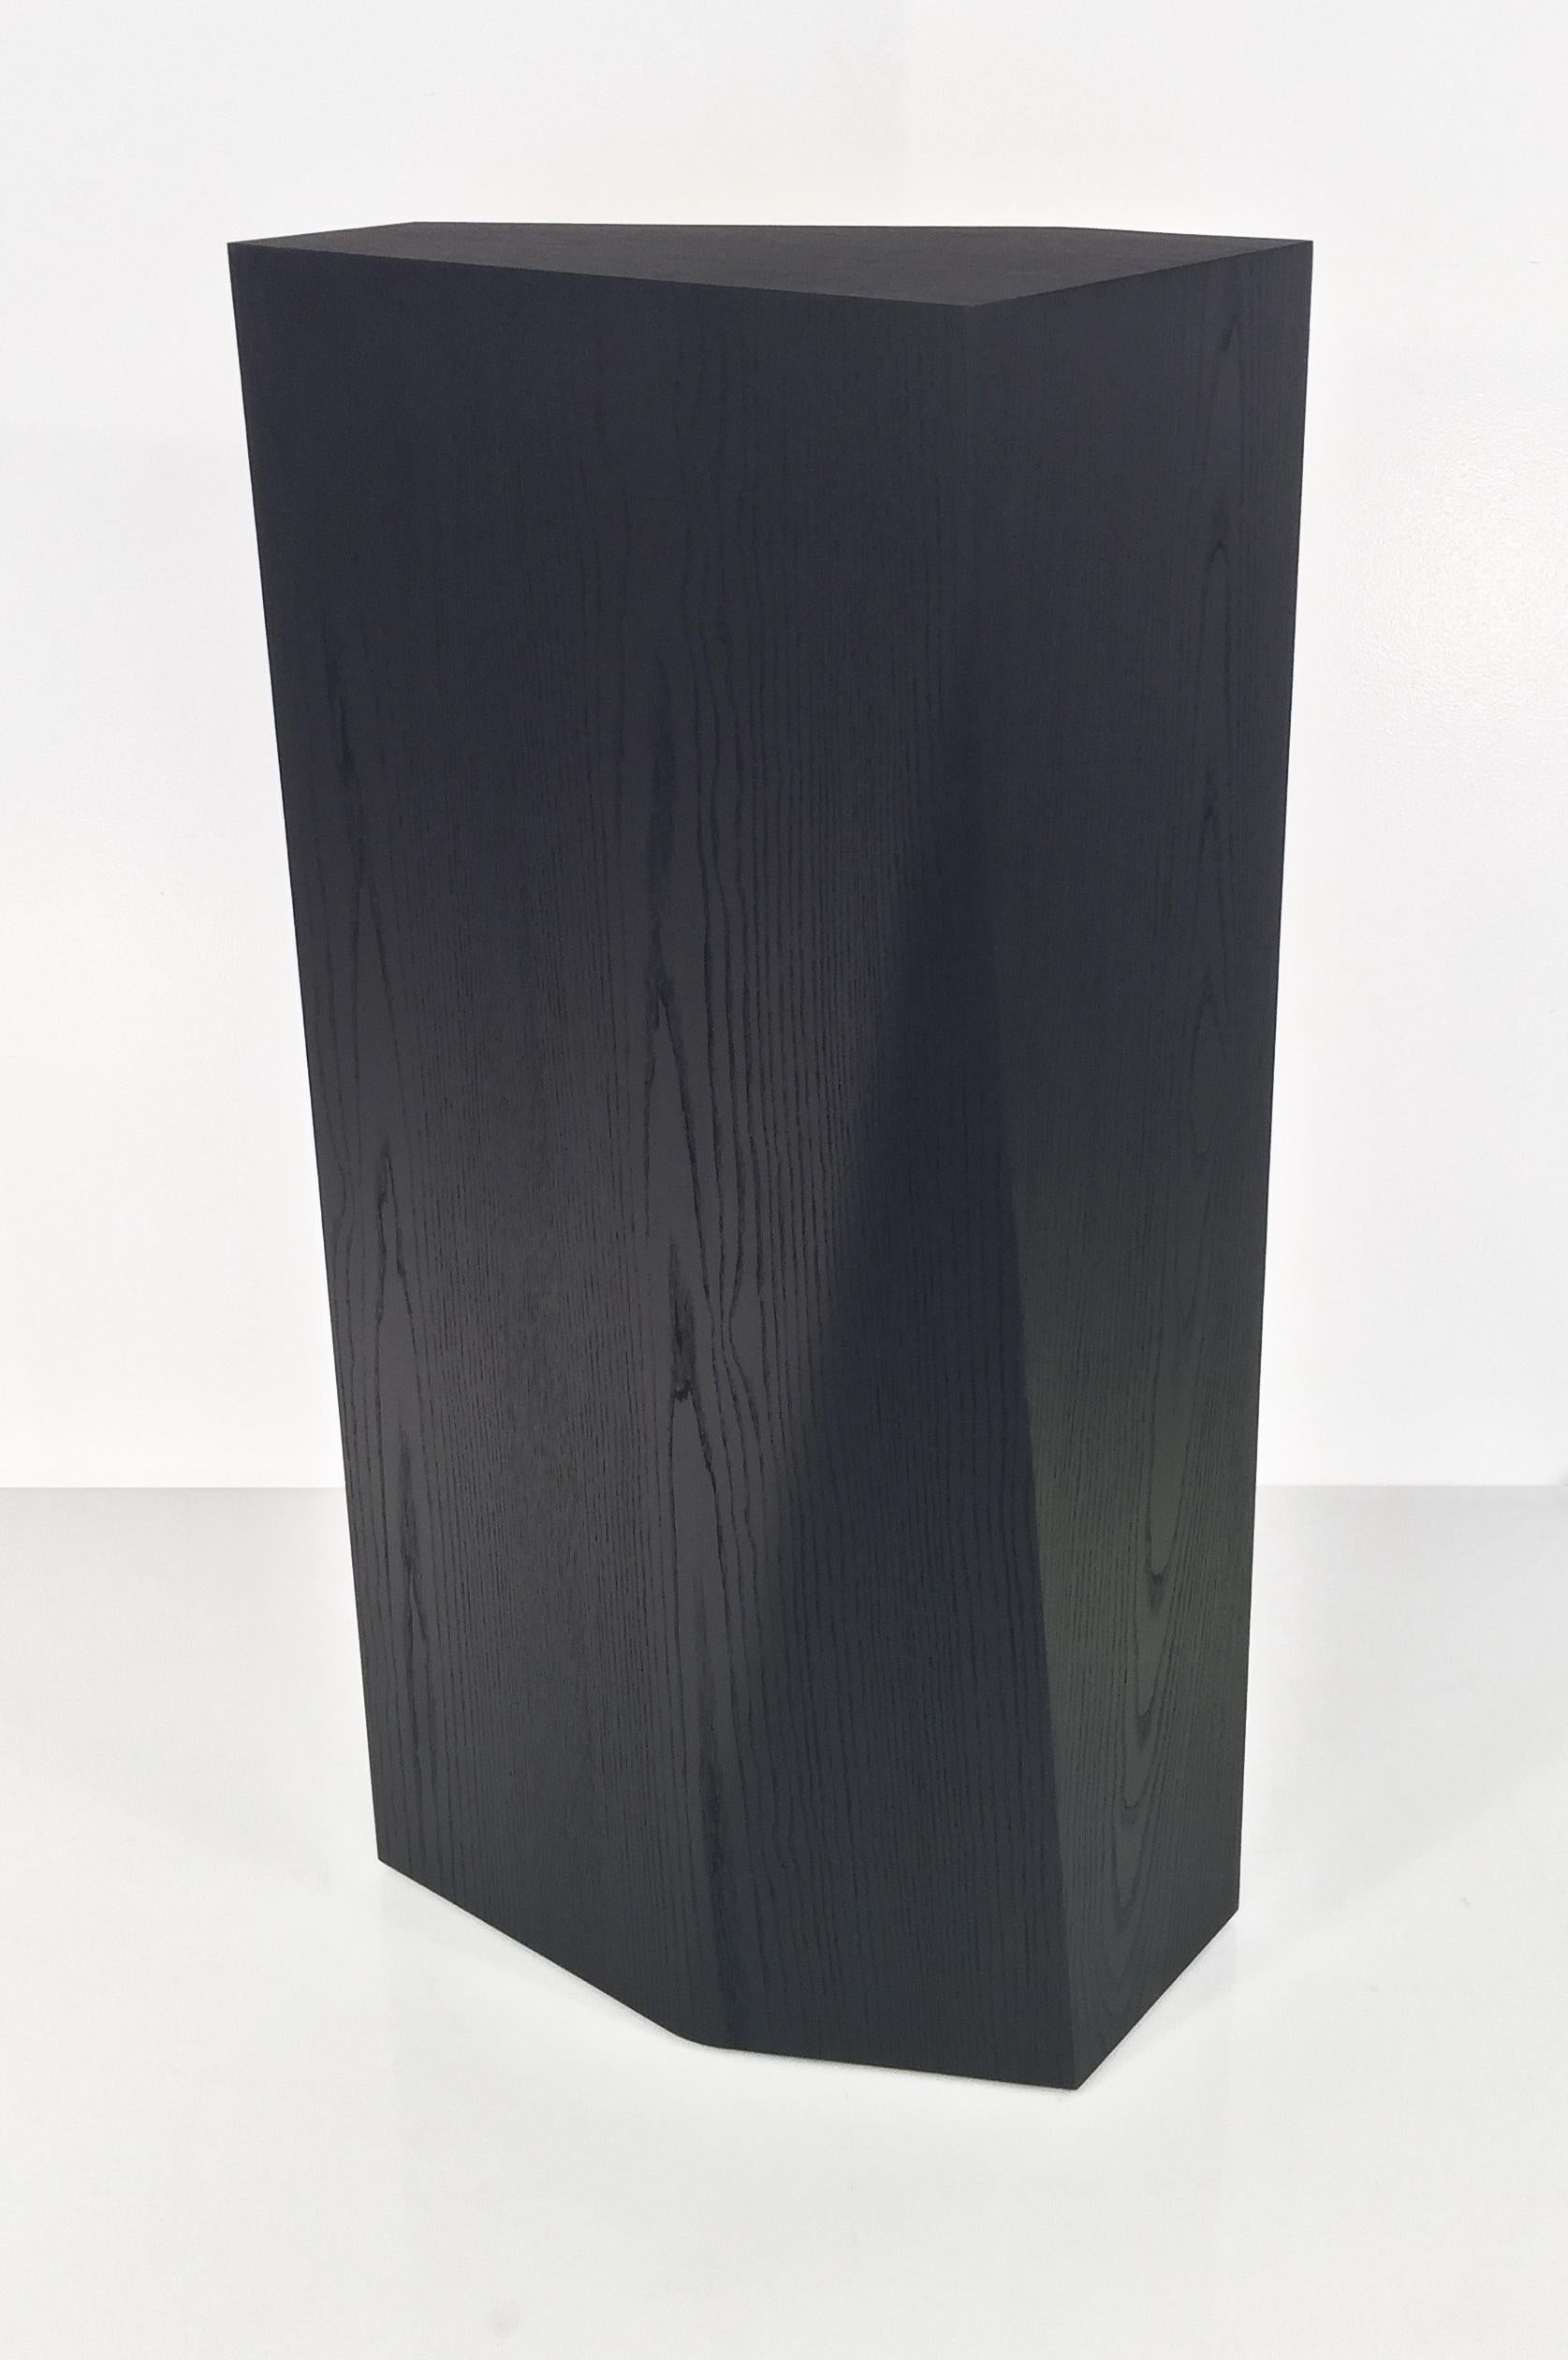 Wood 'scarecrow' william earle's modernist pedestal still made by hand by the artist